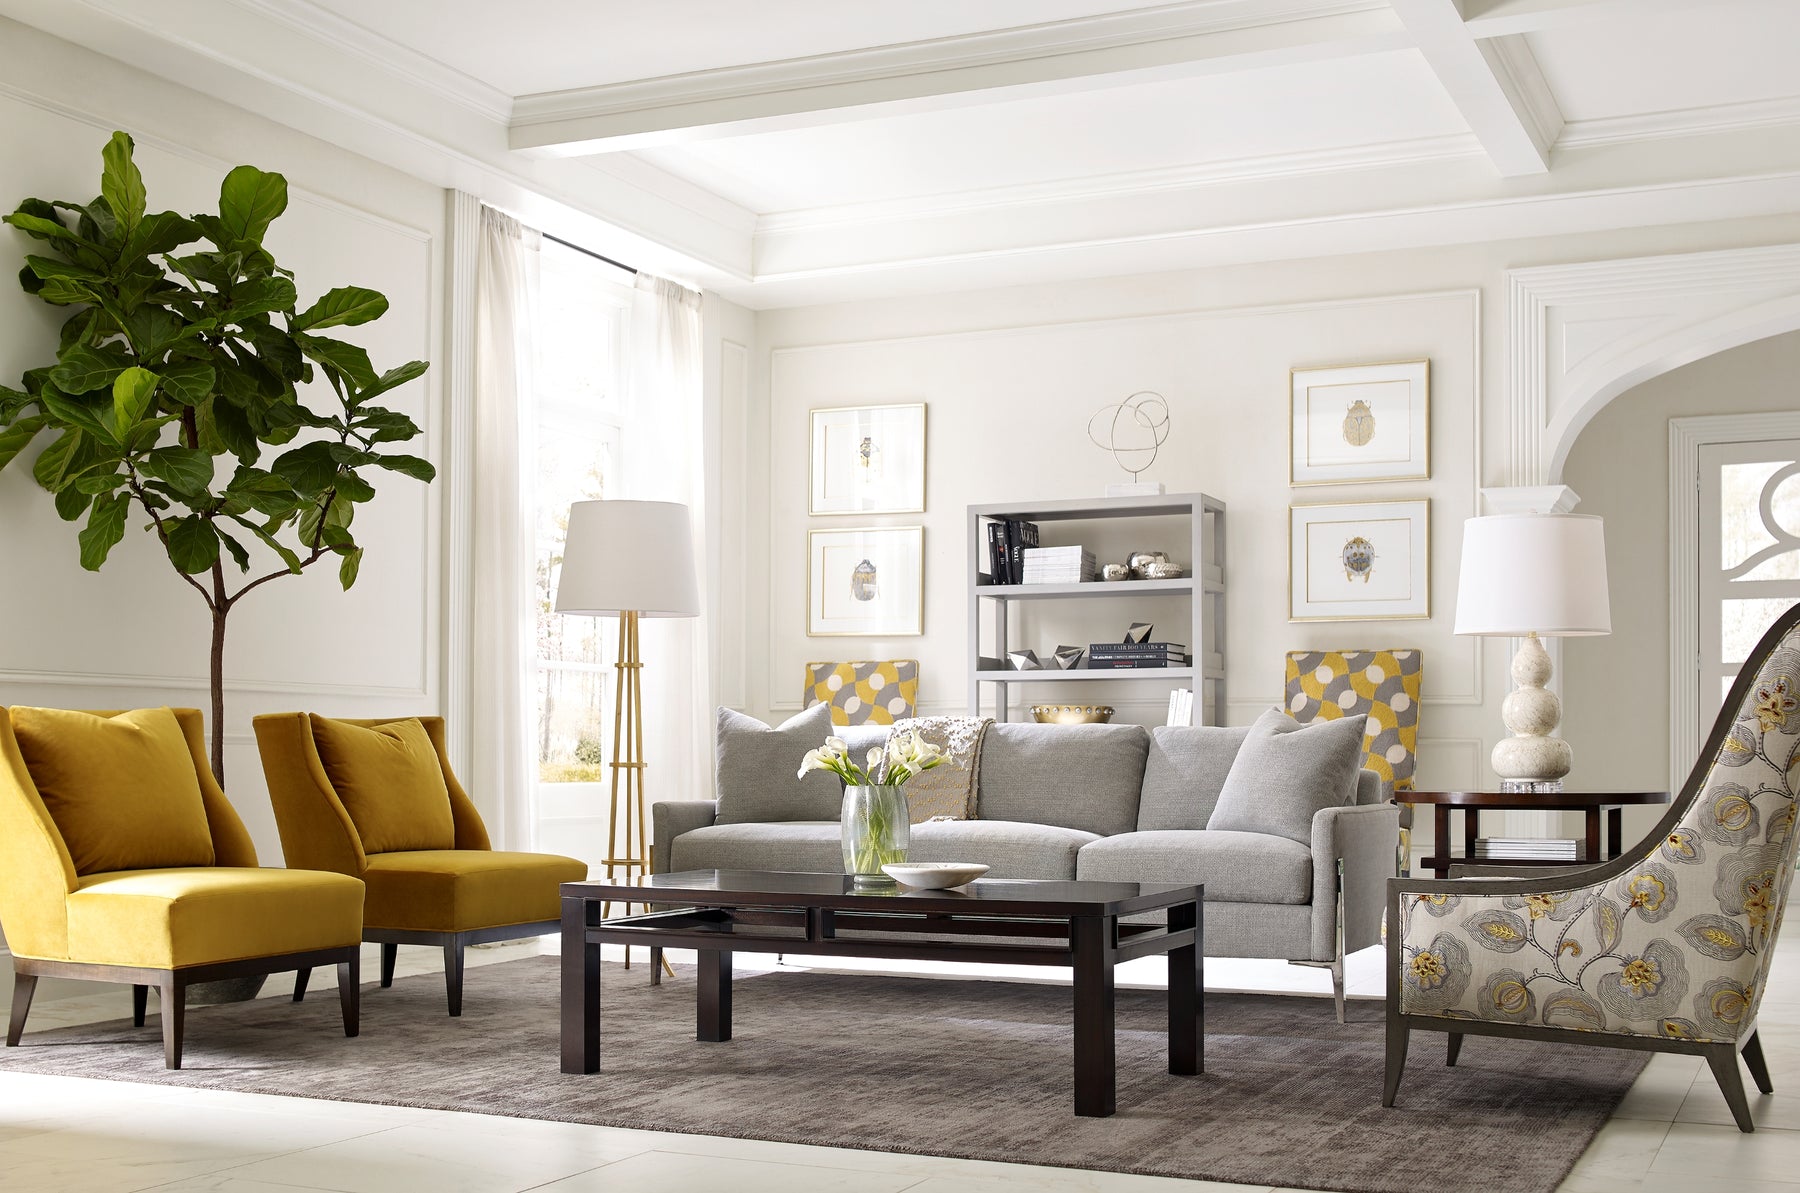 Living room scene with a gray sofa, two yellow chairs, a coffee table, and a patterned fabric chair.